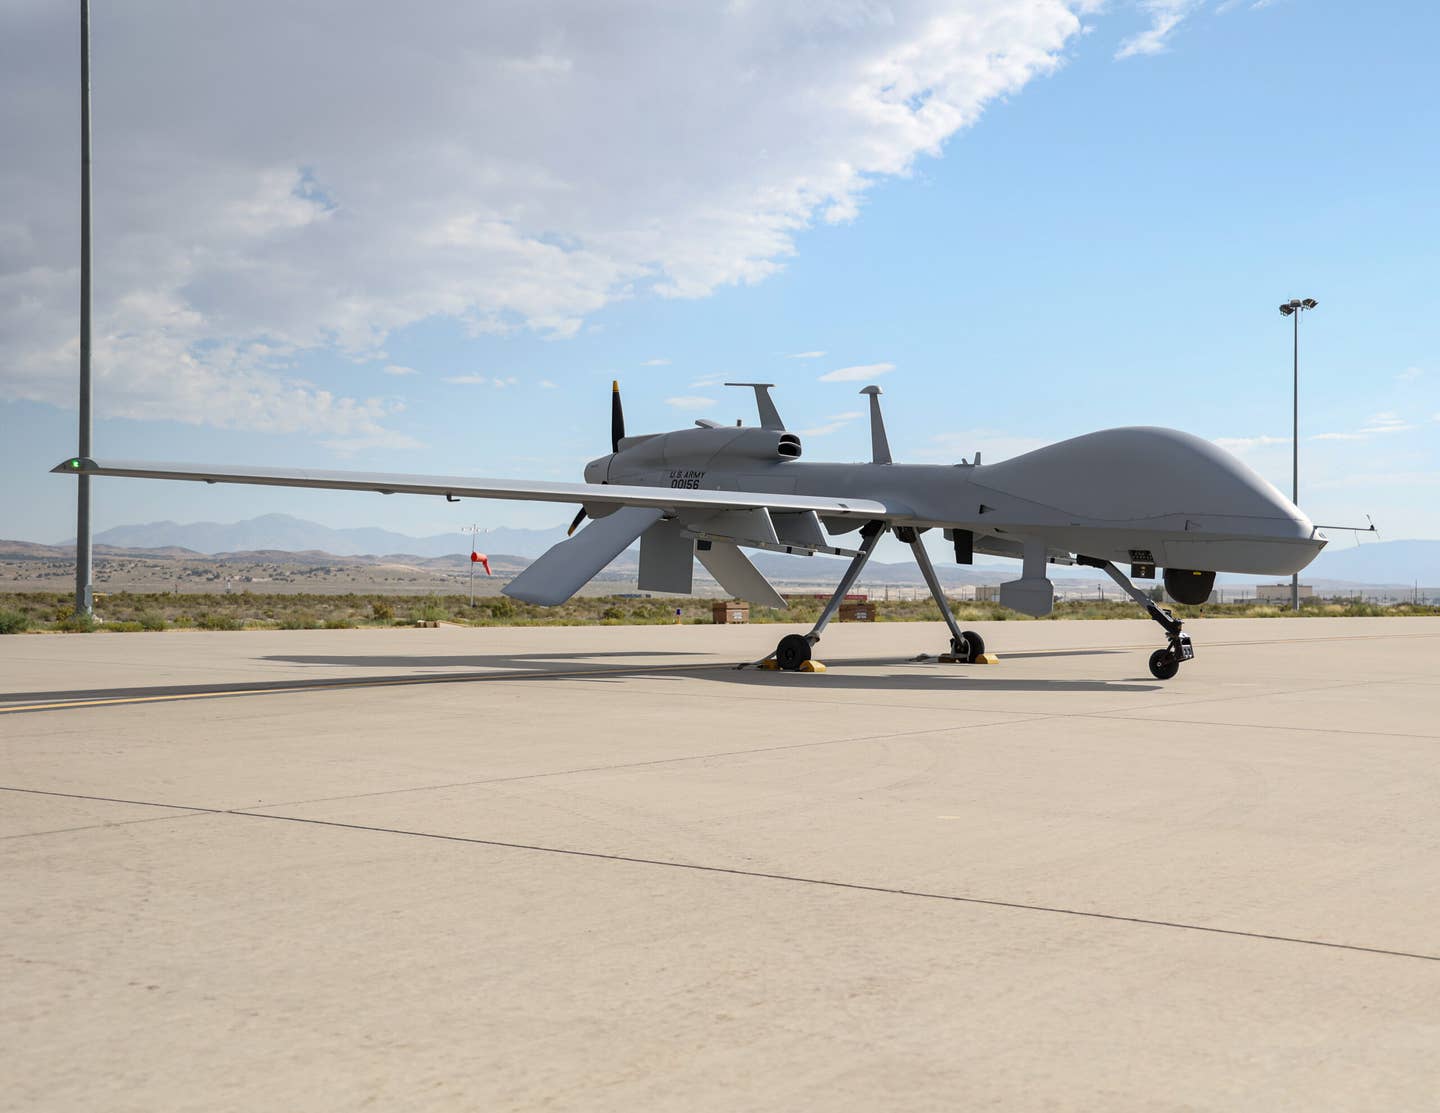 An MQ-1 Gray Eagle shown during a joint force exercise at Dugway Proving Ground, Utah. <em>Credit: U.S. Army National Guard photo by John Zierow</em>